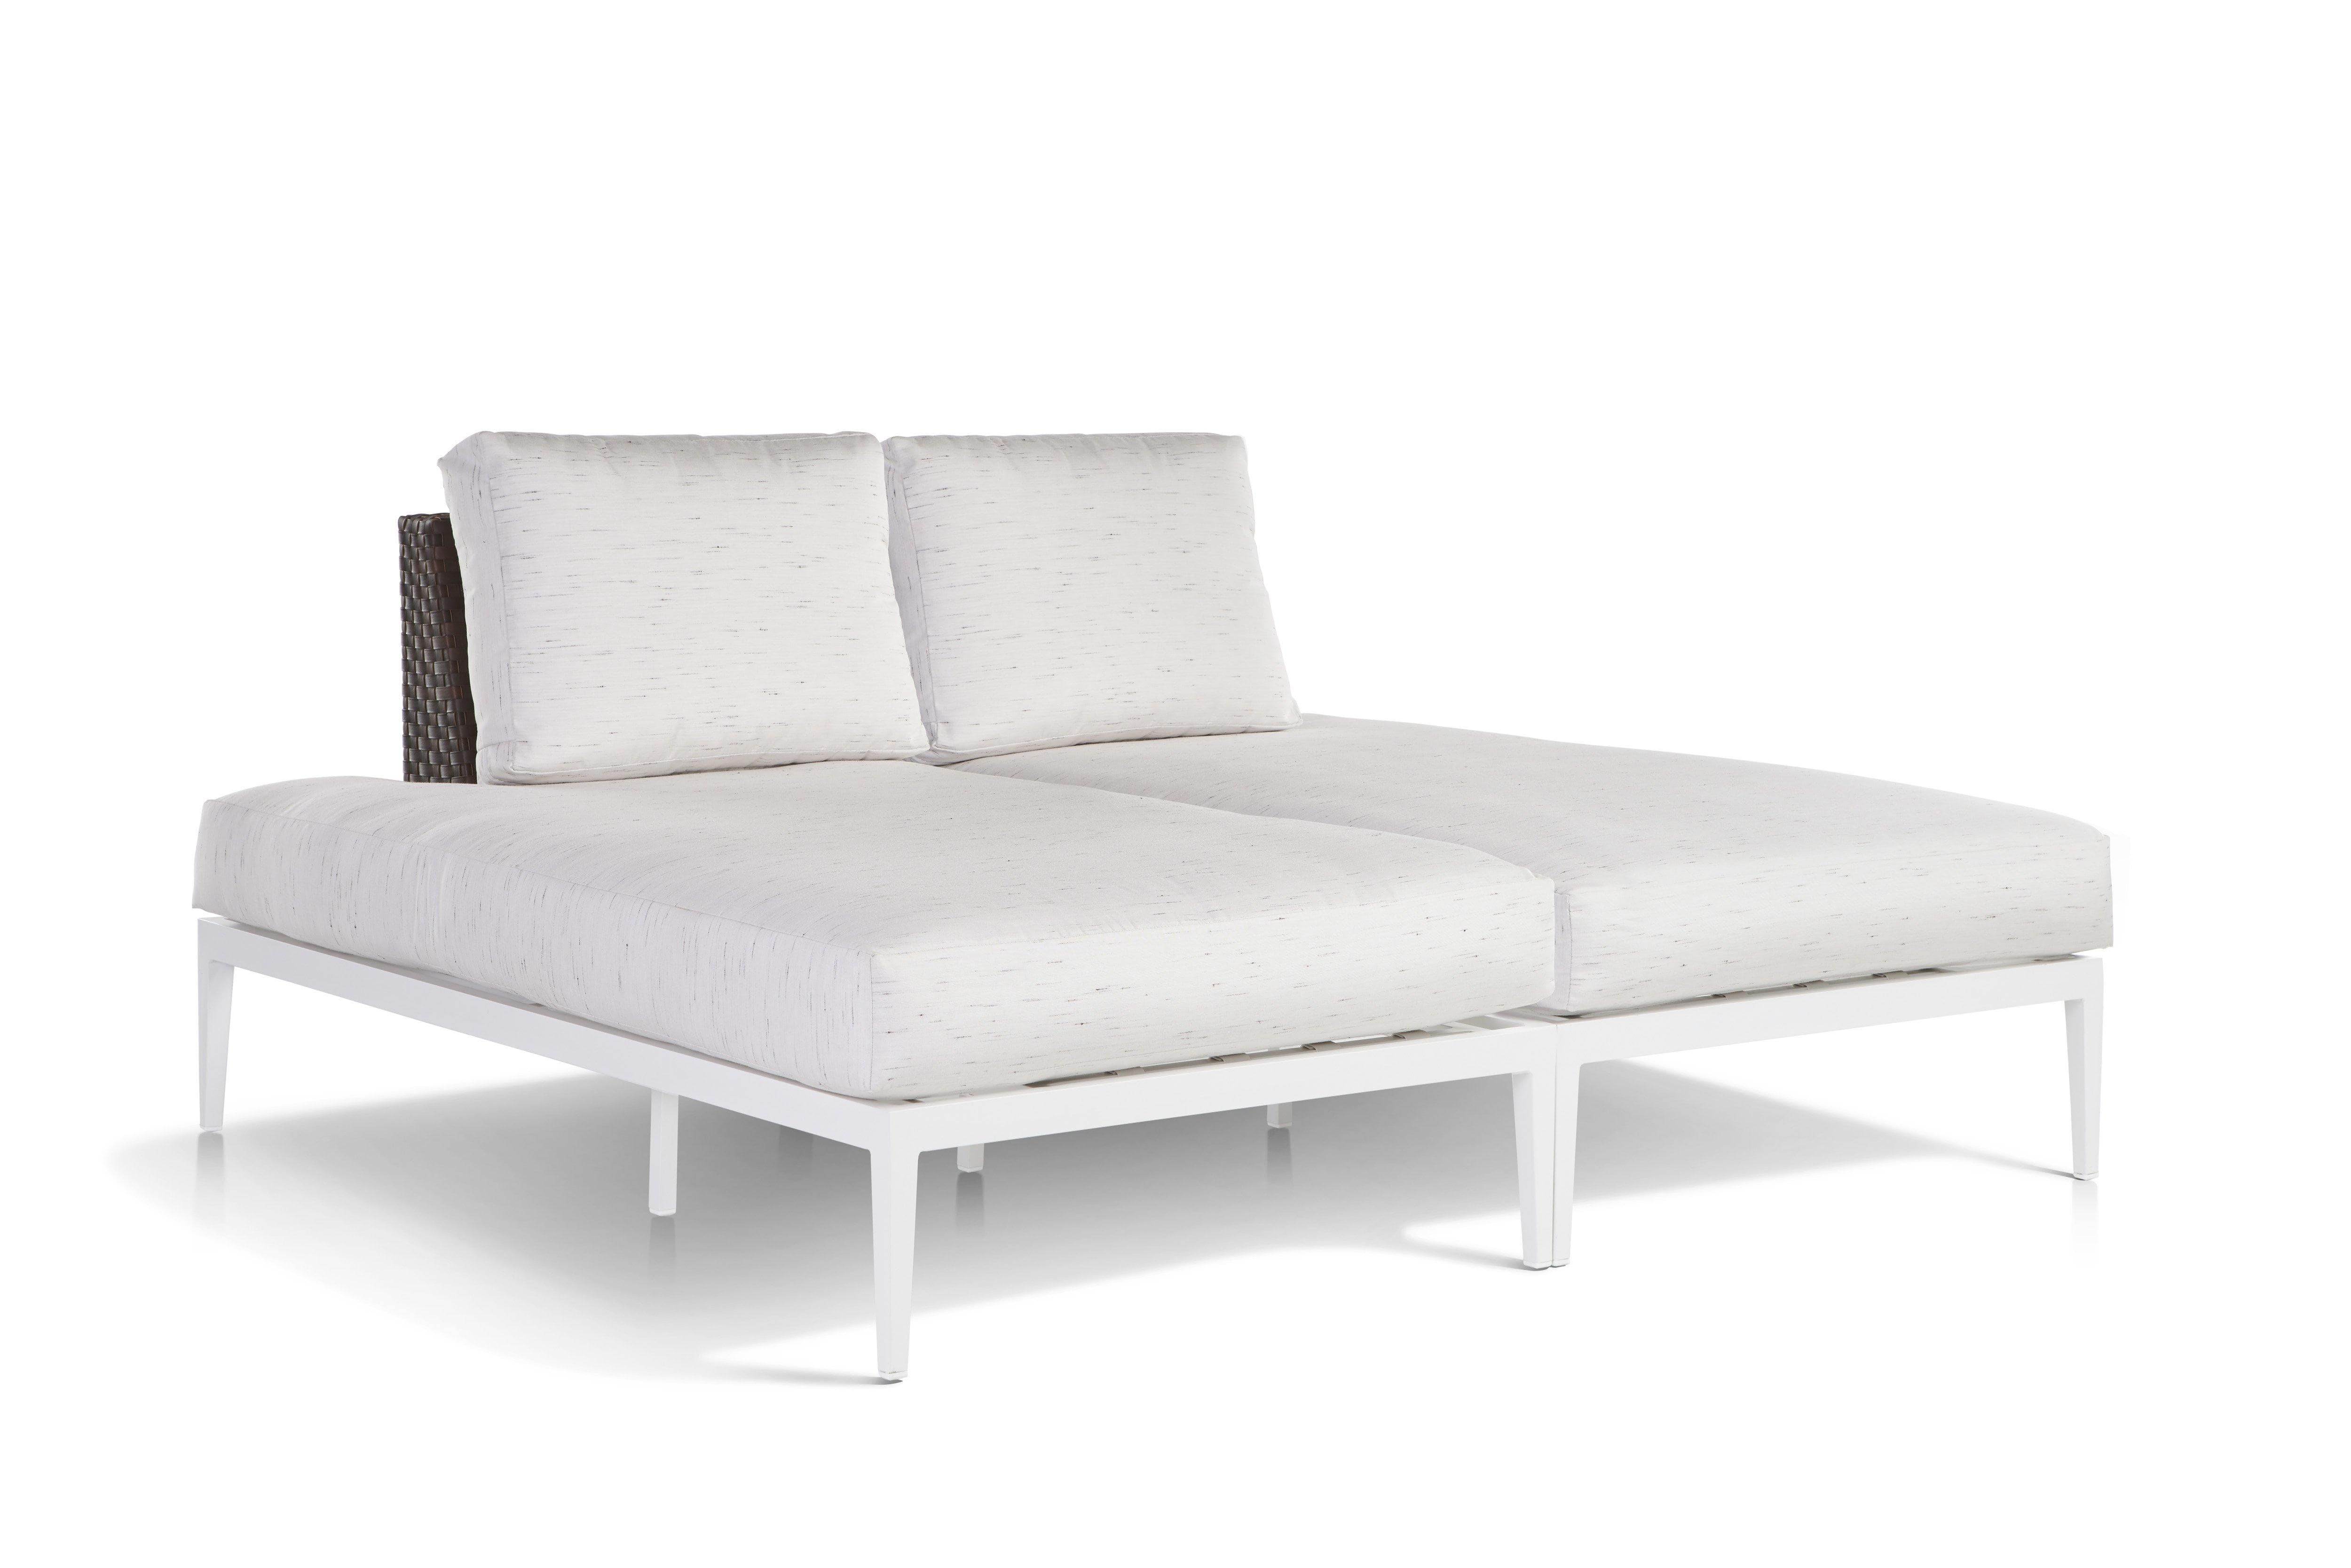 South Sea Outdoor Living Patio Furniture Stevie Double Chaise Lounge with Wraparound Cushions by South Sea Outdoor Living